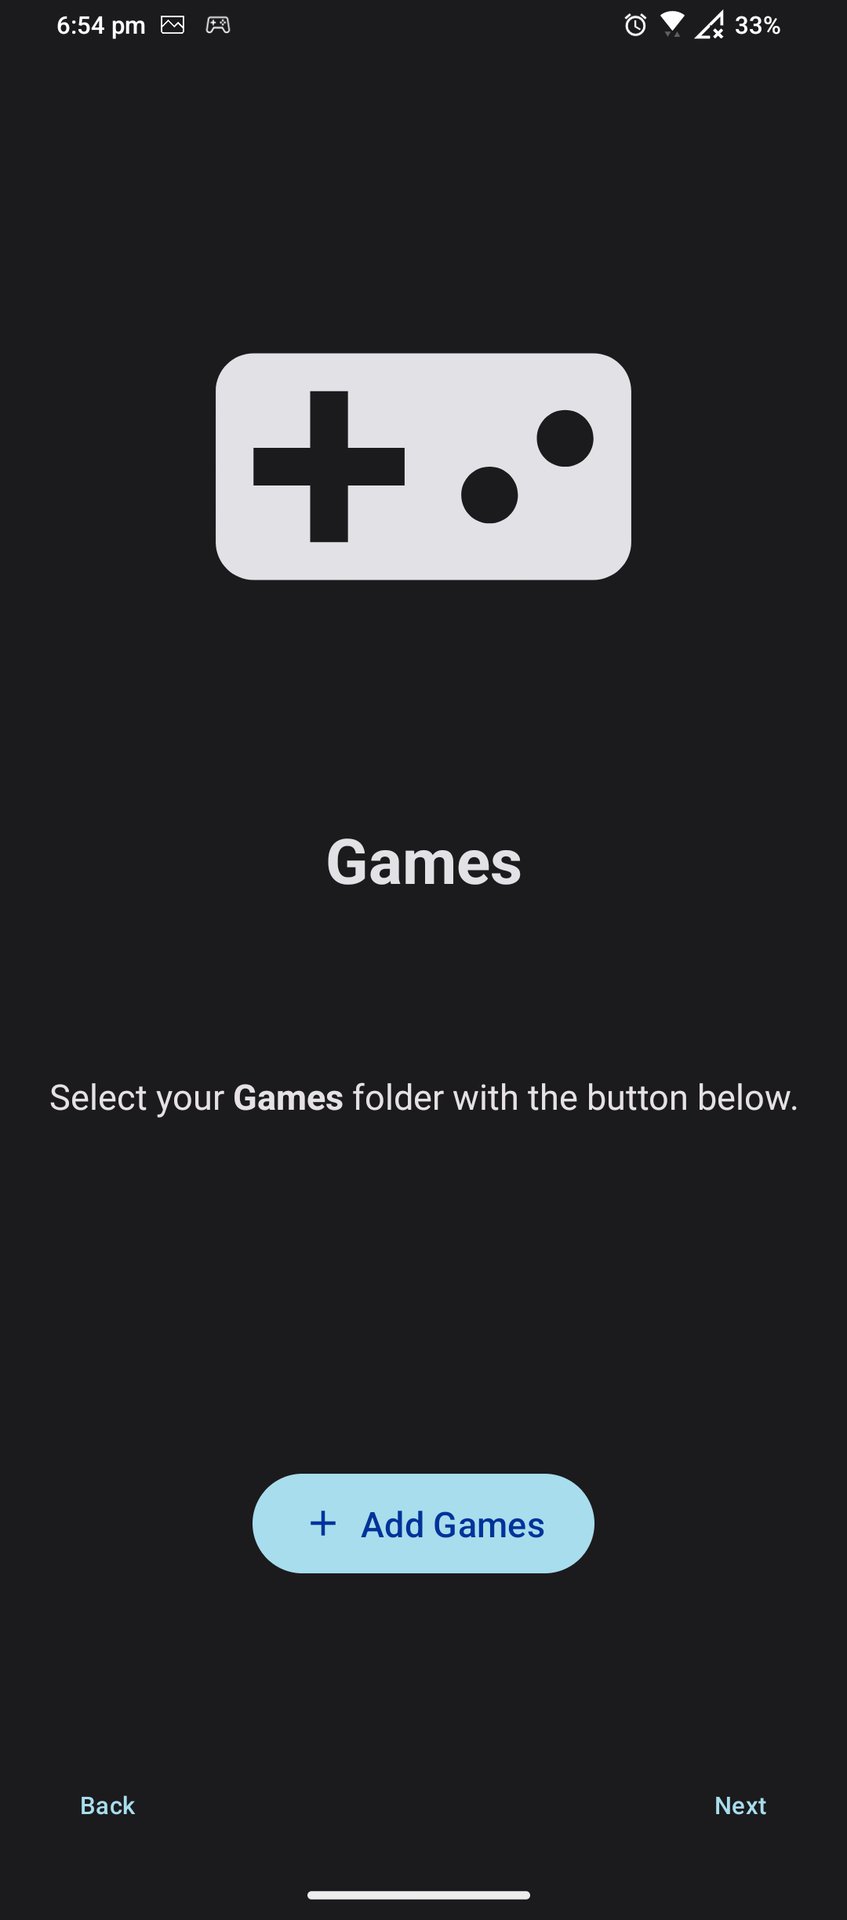 Yuzu Nintendo Switch Emulator Now Operable on Select Android Devices